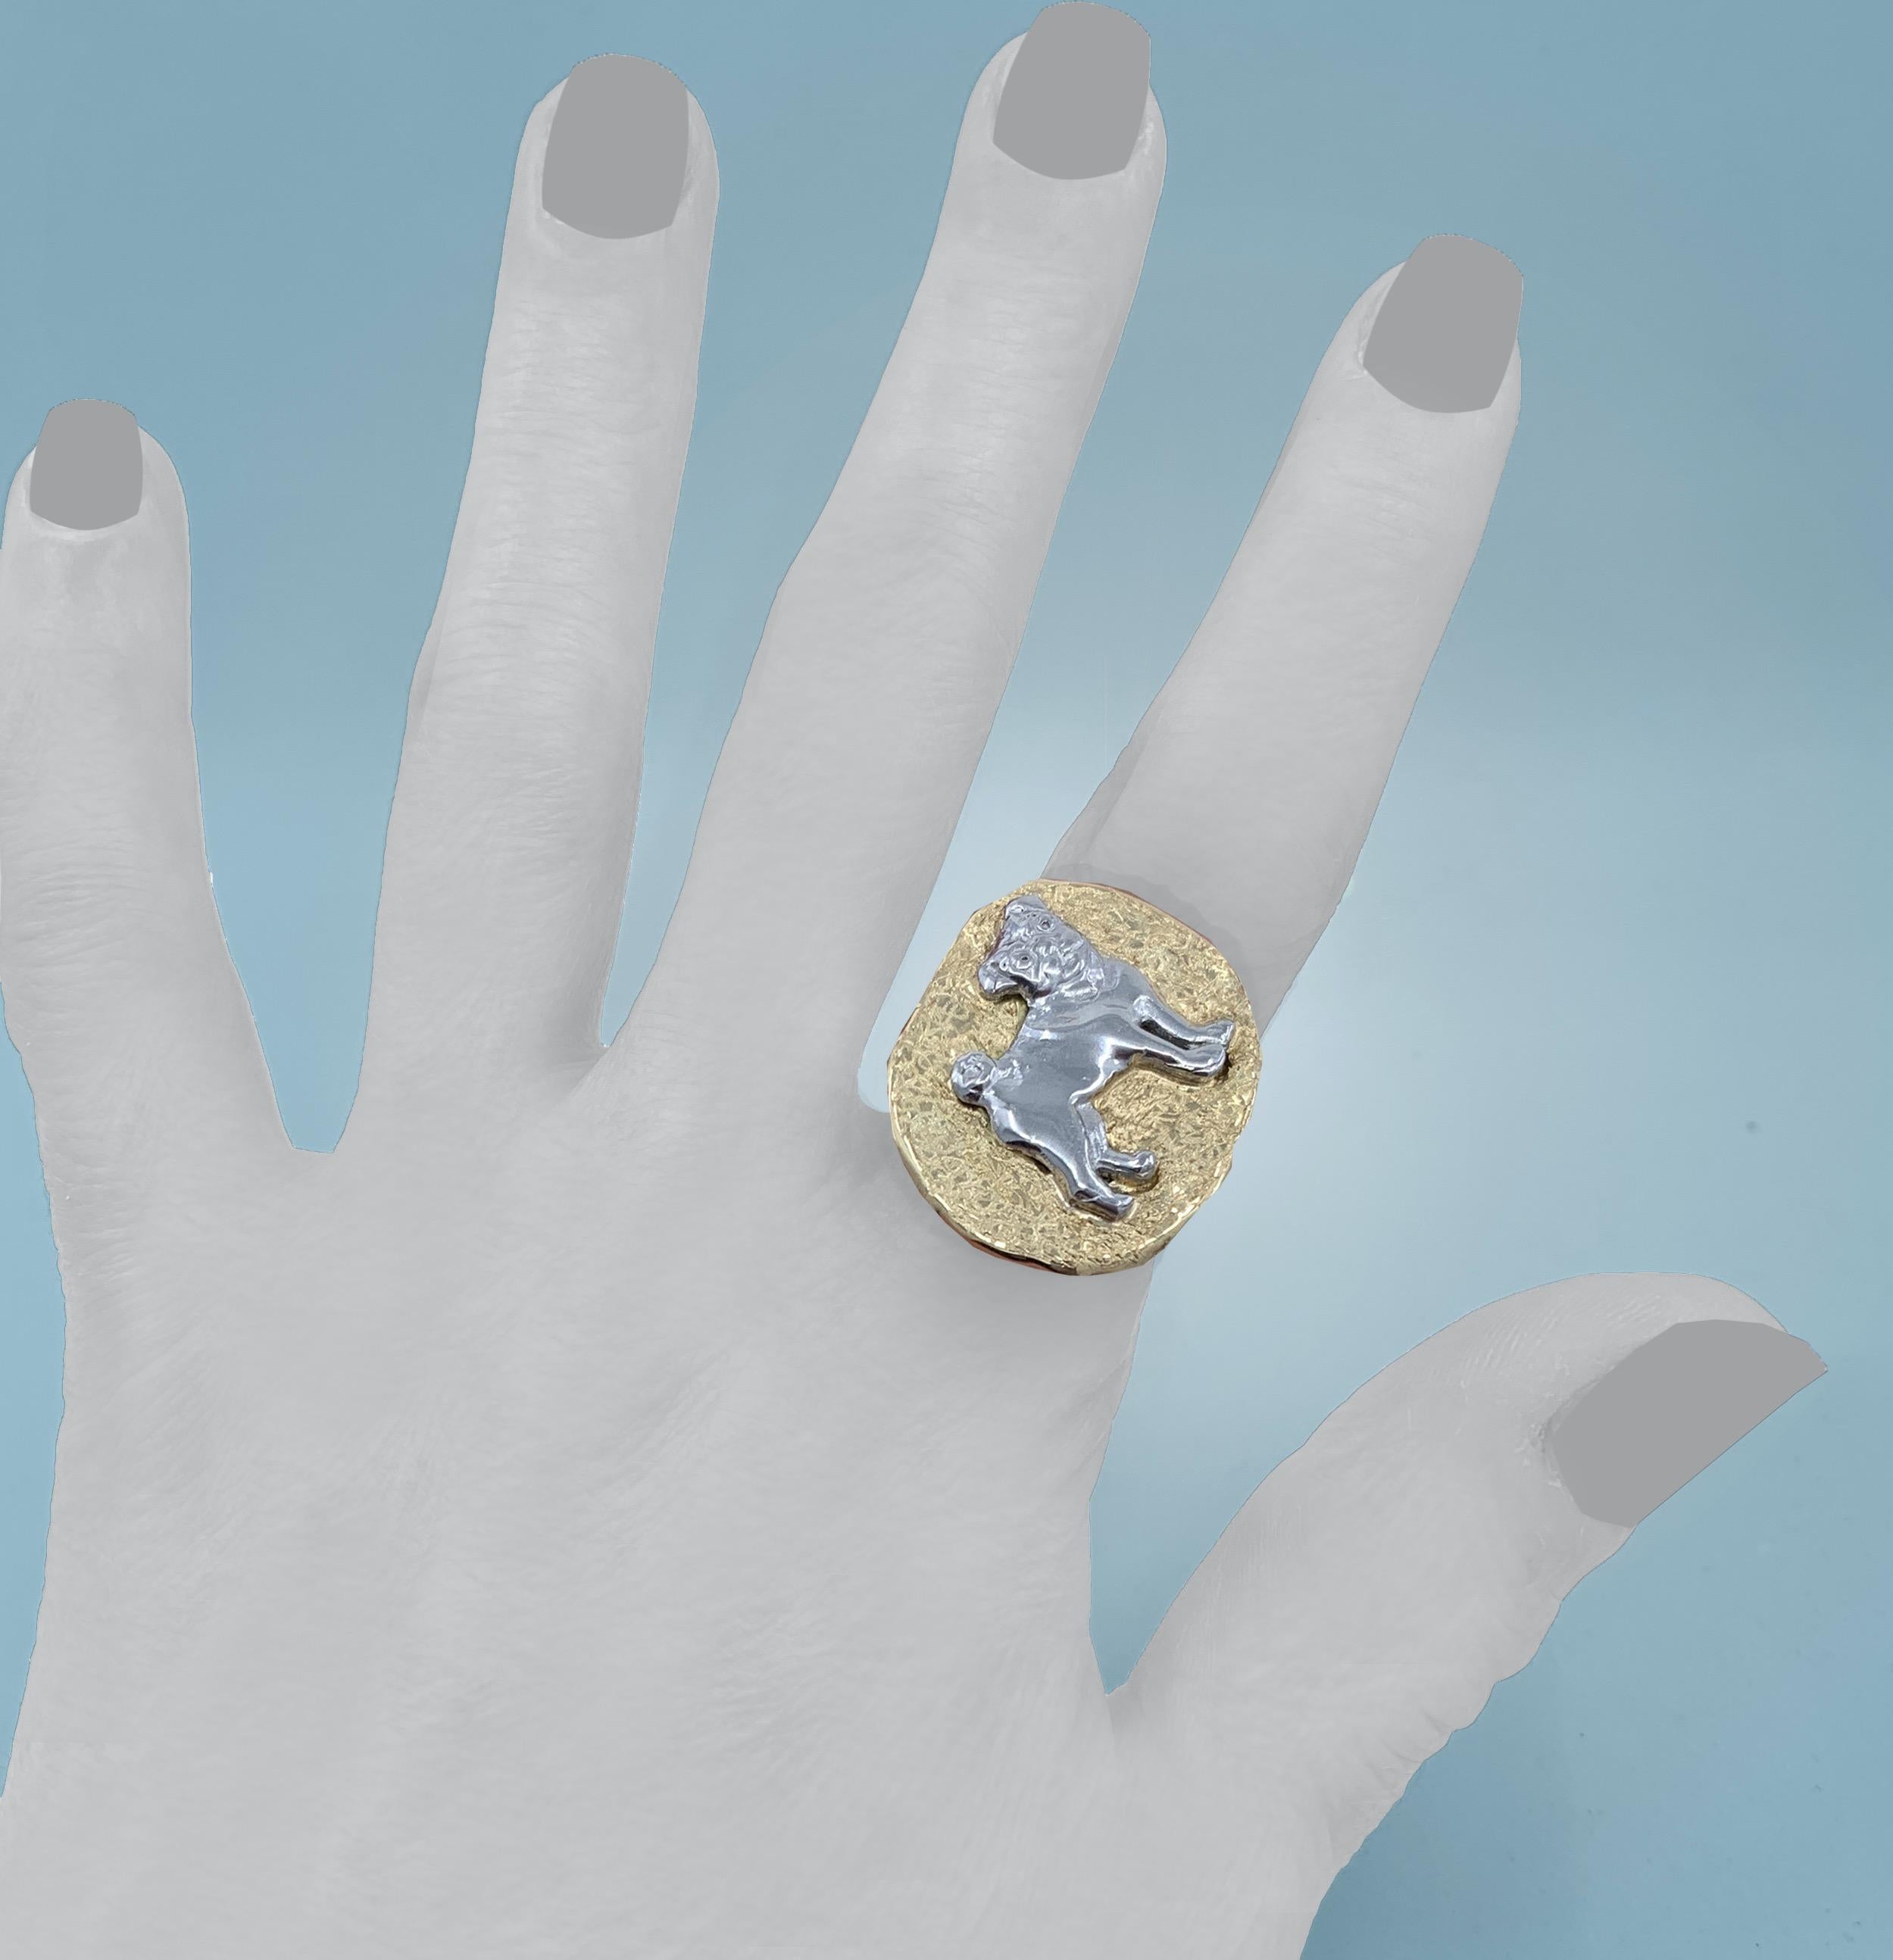 This adorable, one-of-a-kind ring by Eytan Brandes is an homage to Eytan's favorite pug.  

The 18 karat gold mounting is high polish on the sides and back, but the not-quite-symmetrical oval face of the ring has a cool 